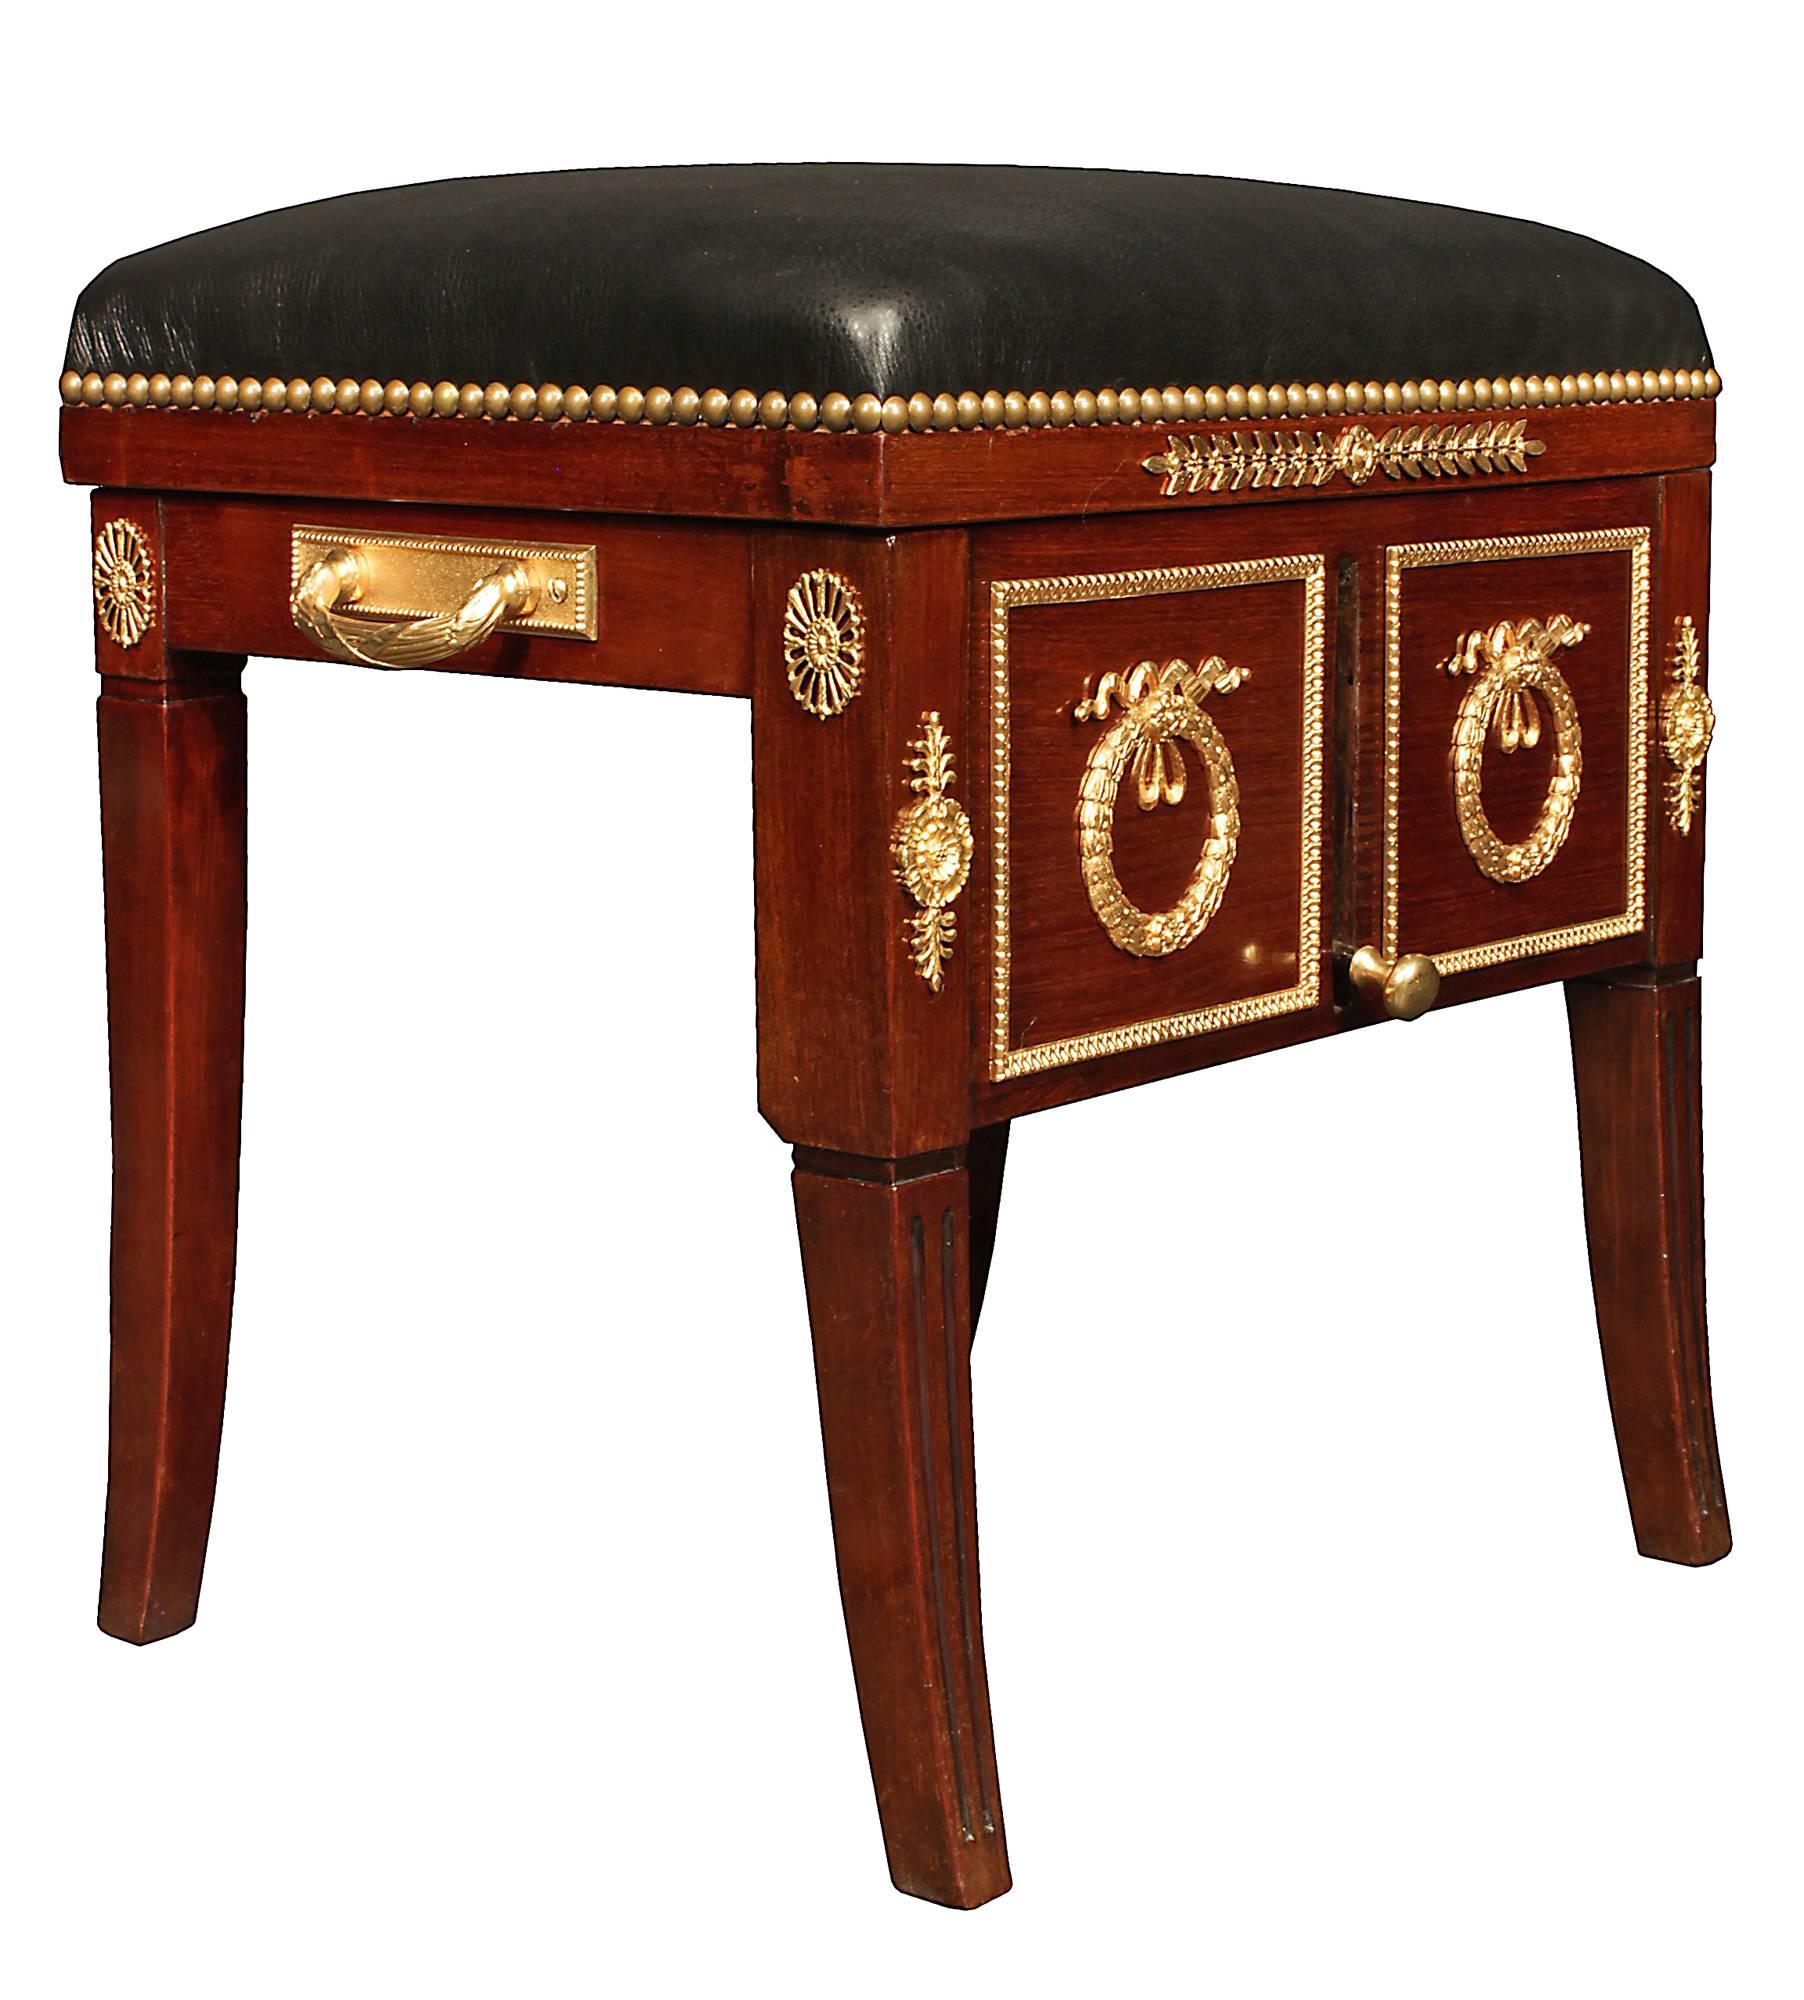 A remarkable French 19th century Neo-Classical st. mahogany and ormolu piano bench. This adjustable mechanical bench is raised on fluted legs accented with pierced ormolu mounts at the top and sides. At the front are large ormolu wreaths and bows